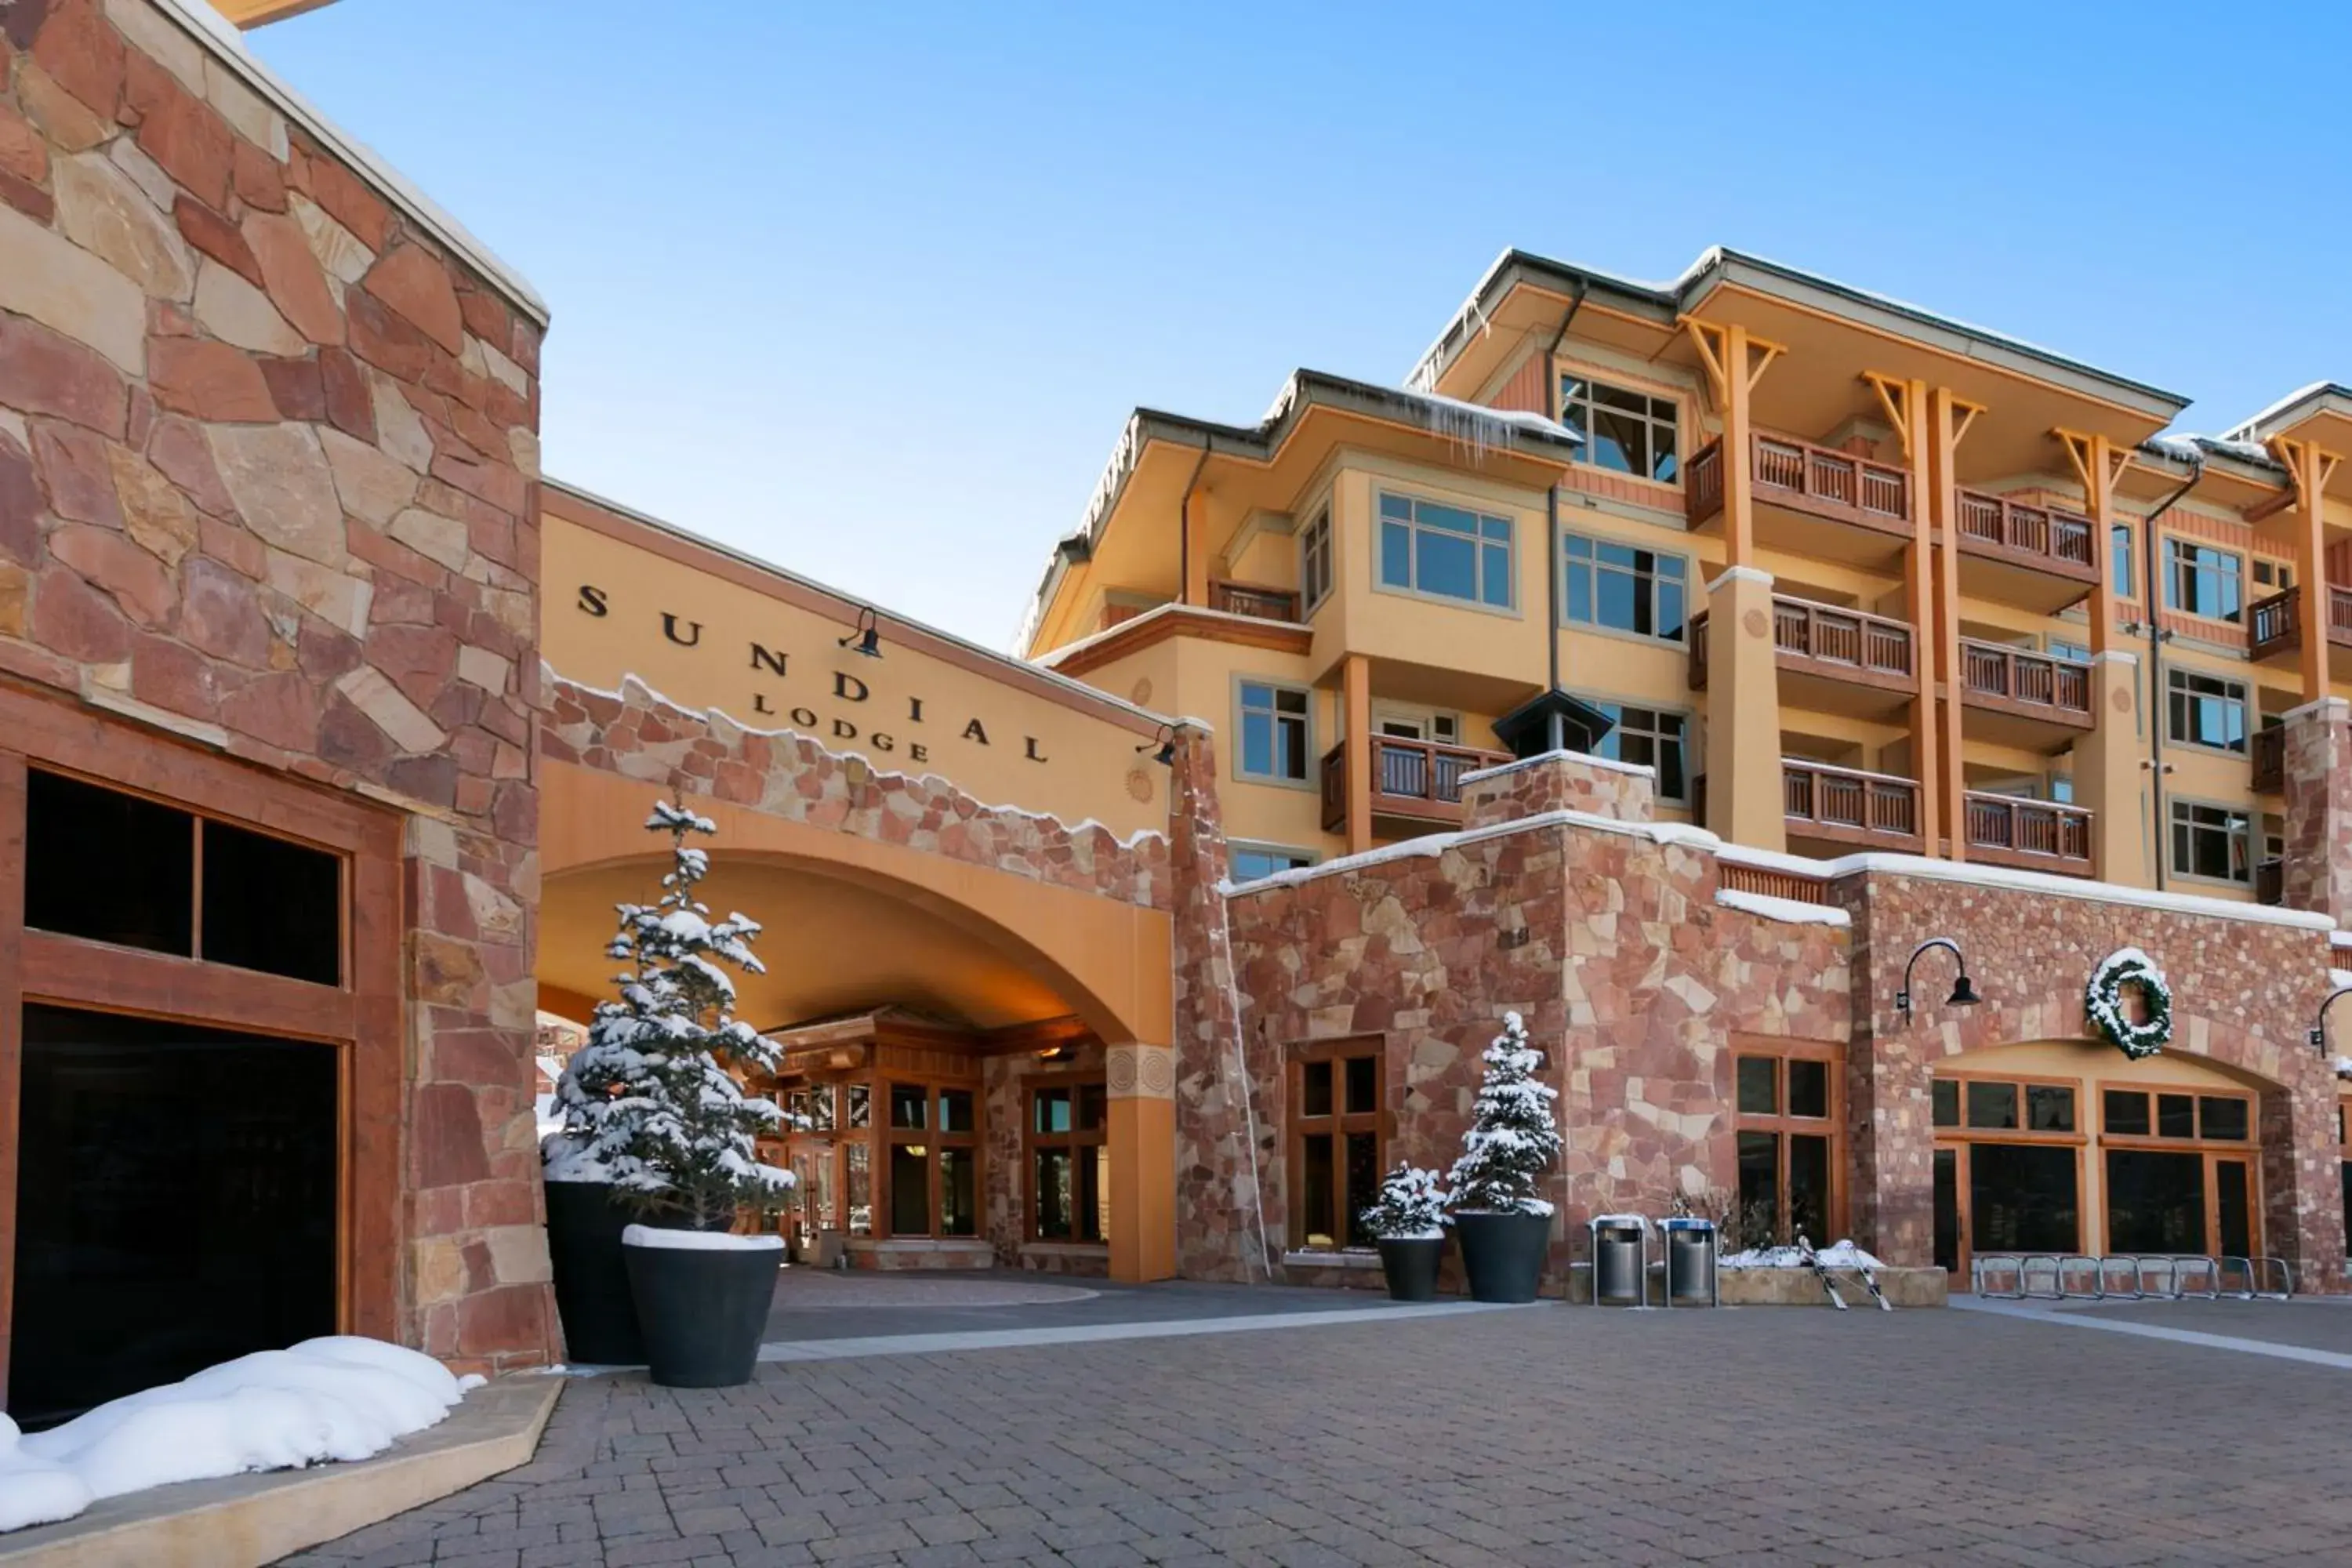 Facade/entrance in Sundial Lodge by All Seasons Resort Lodging